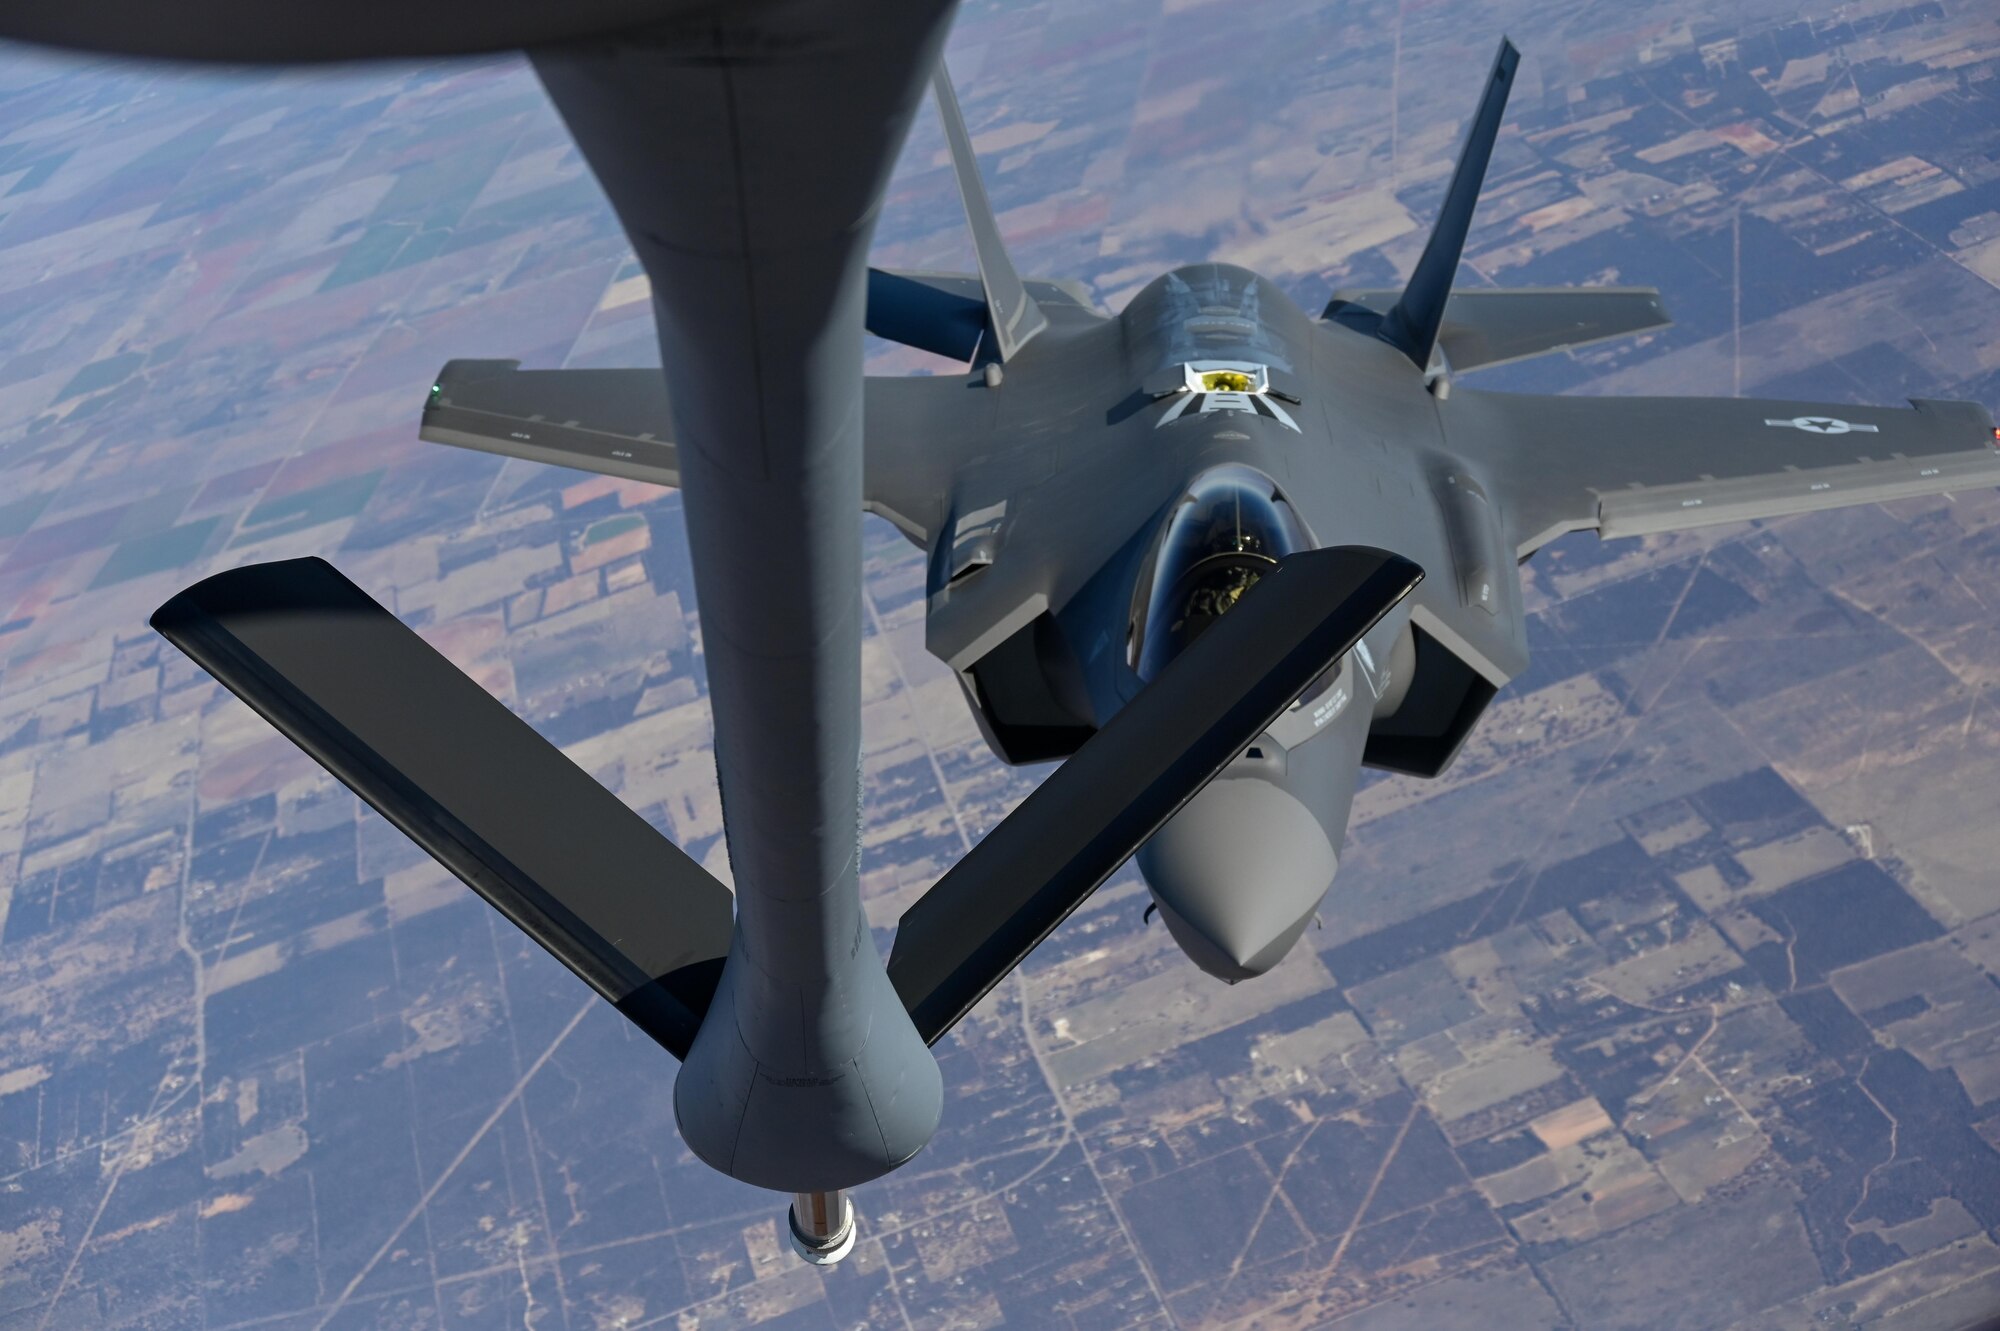 An F-35 Lightning II from the Defense Contract Management Agency conducts its first flight and first tanking with a KC-135R Stratotanker from the 465th Air Refueling Squadron, Tinker Air Force Base, Oklahoma, Feb. 24, 2021. Once fully tested this F-35 will join the fleet at Eielson Air Force Base, Alaska. (U.S. Air Force photo by Senior Airman Mary Begy)